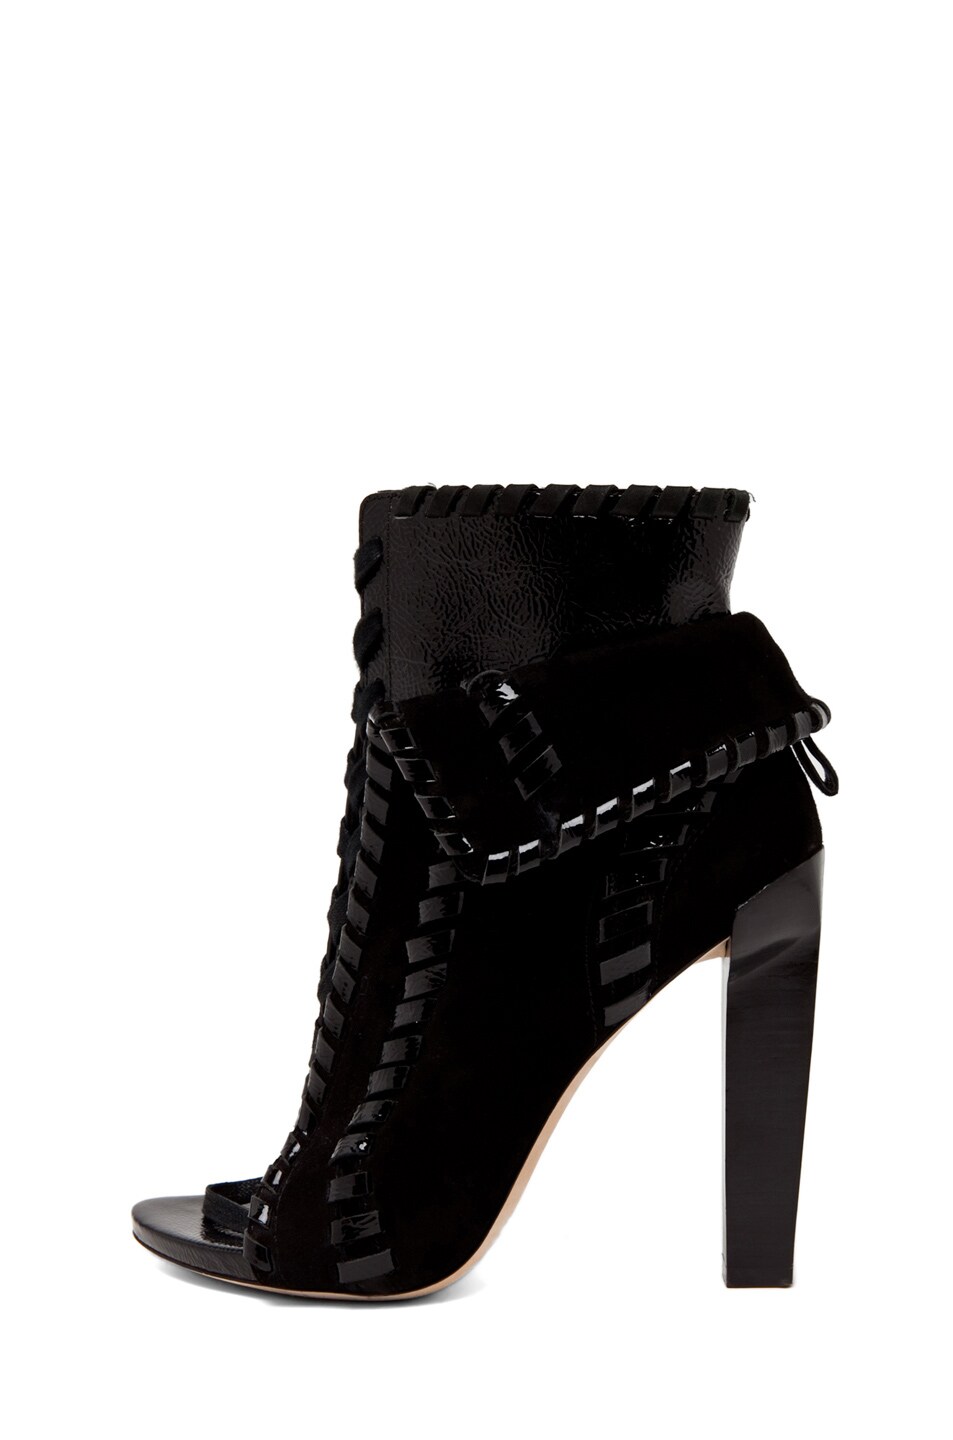 Image 1 of Alexander Wang Freja Whipstitch Bootie in Black